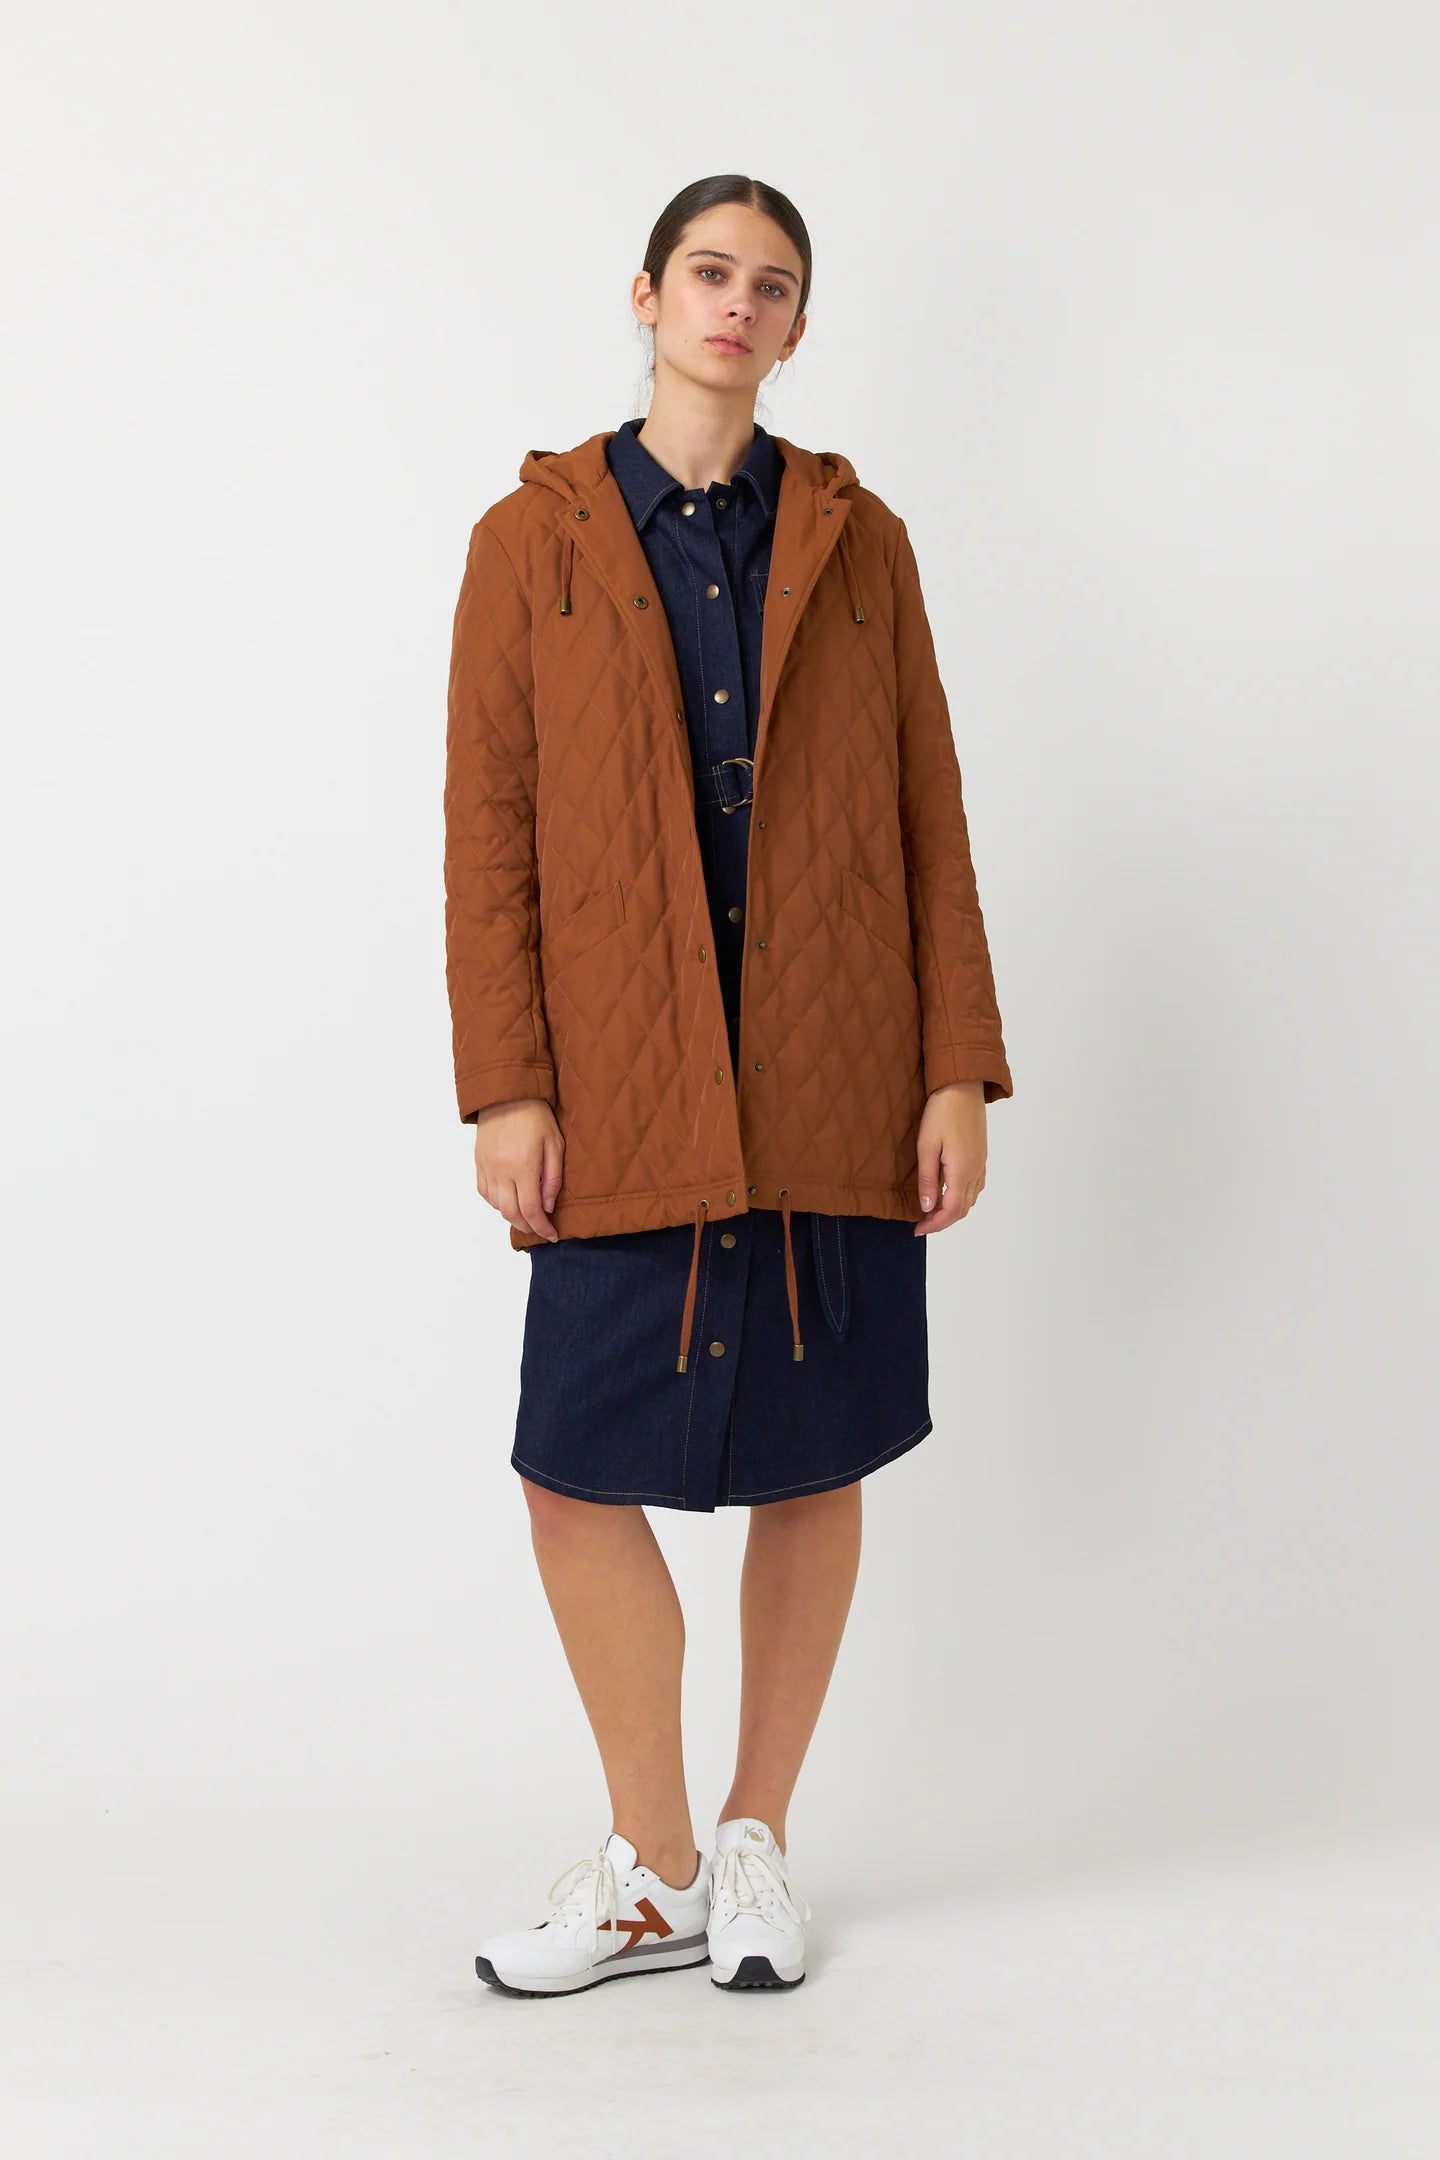 SYLVESTER Quilted Parka